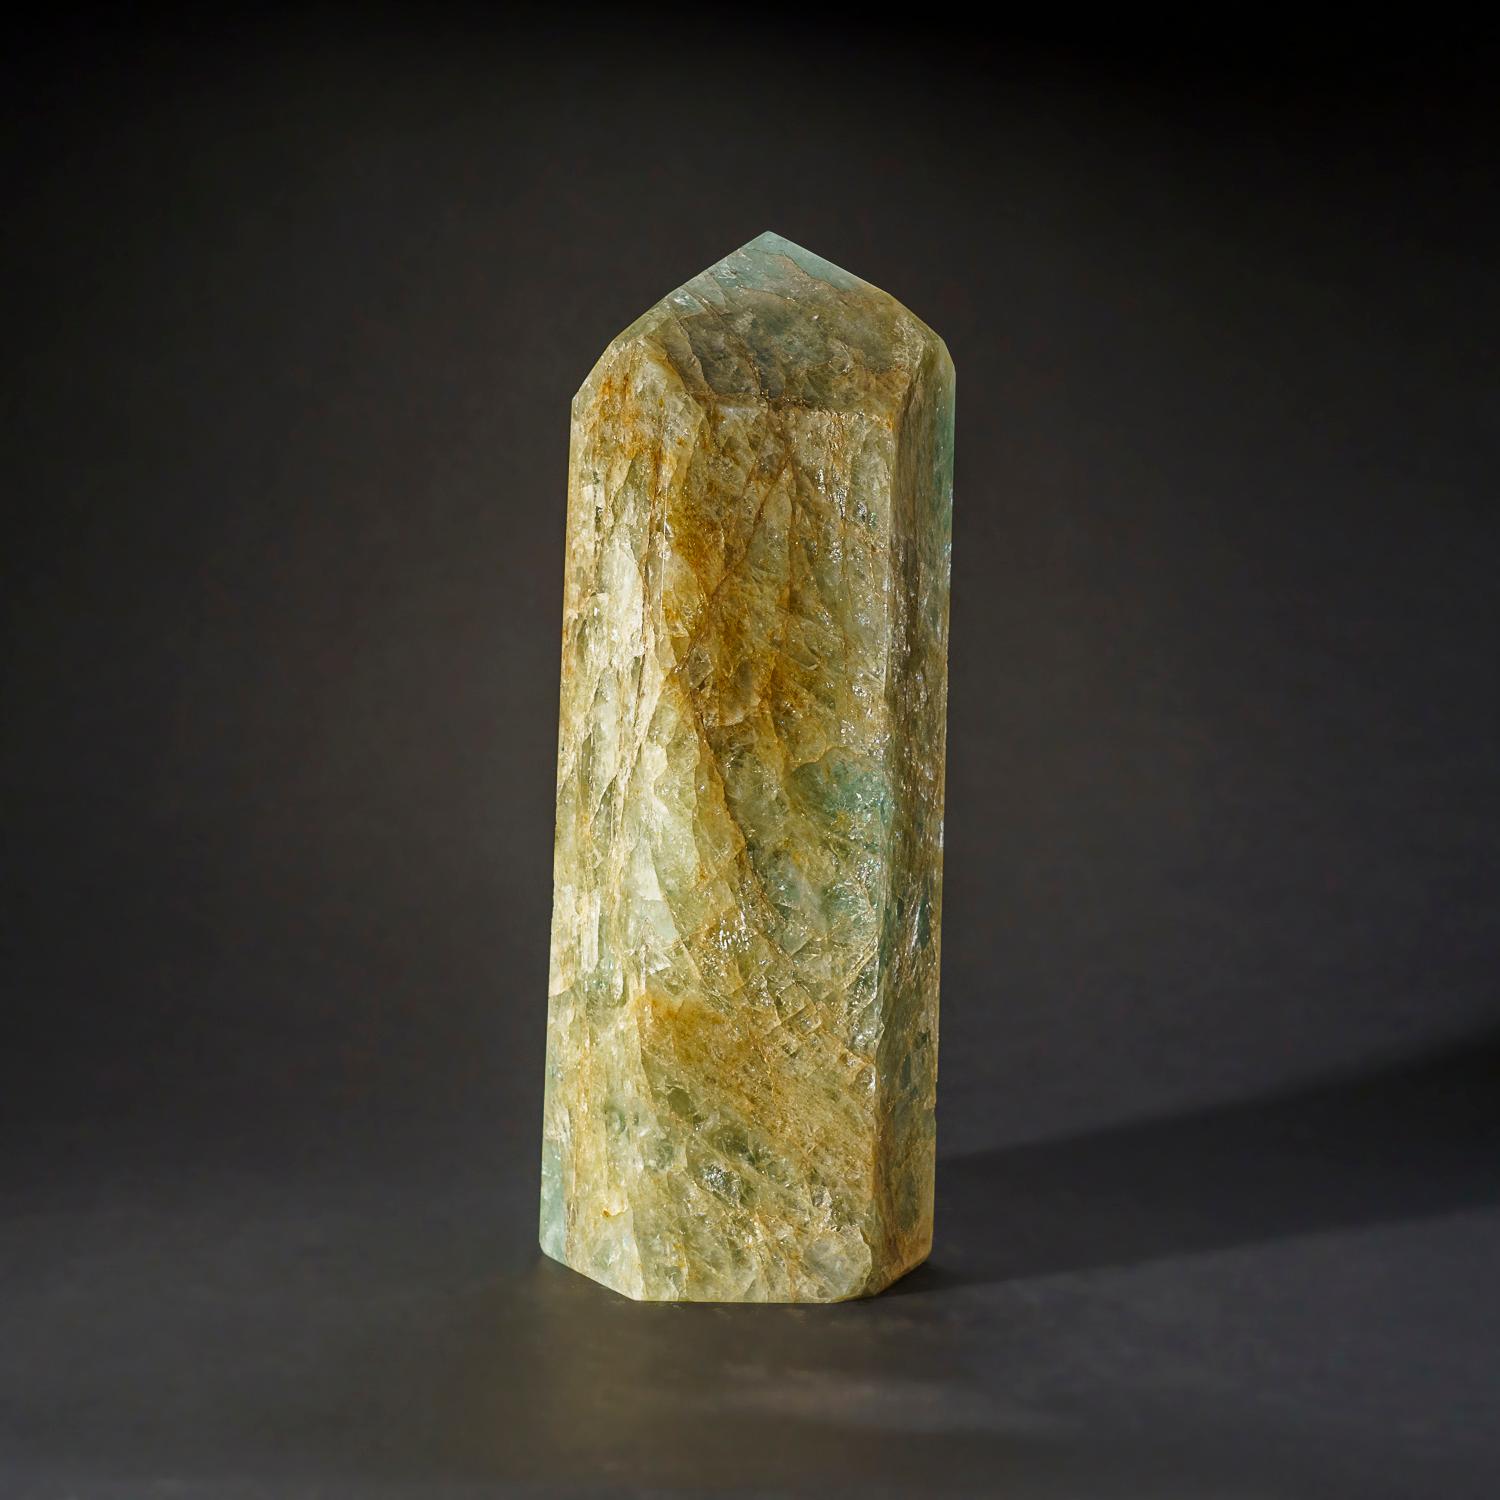 Museum-quality, large crystal of transparent Aquamarine point with perfectly terminated face. This world-class crystal point with top luster and excellent natural blue color.

Aquamarine is has a gentle, high vibration. It is a cleansing stone that